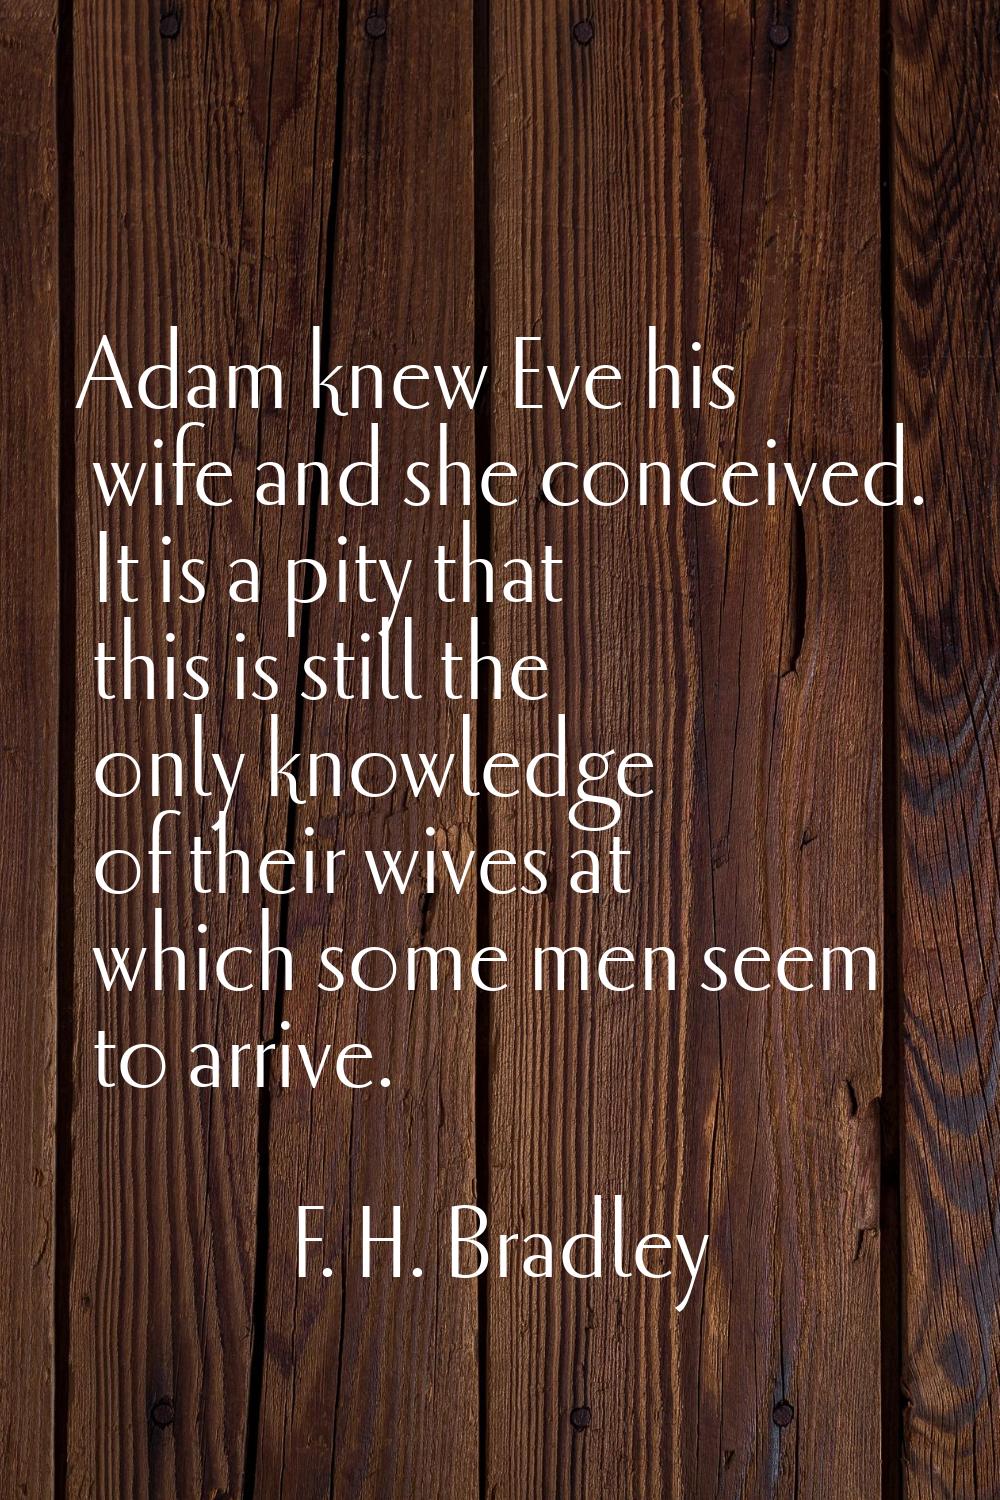 Adam knew Eve his wife and she conceived. It is a pity that this is still the only knowledge of the